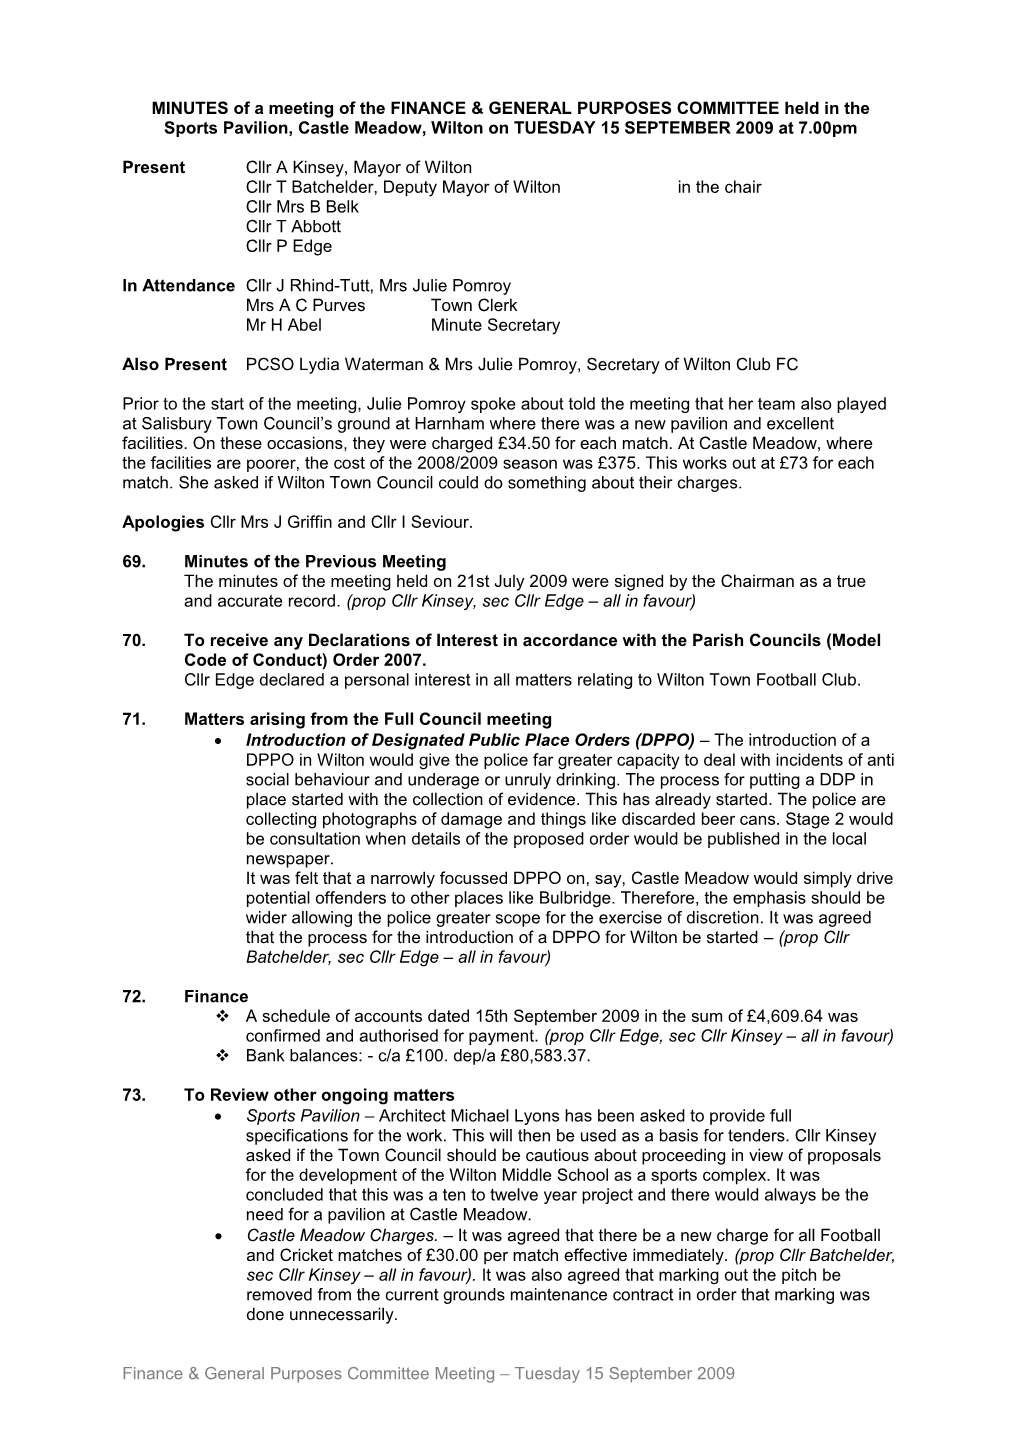 MINUTES of a Meeting of WILTON TOWN COUNCIL Held in the COUNCIL CHAMBERS, KINGSBURY SQUARE